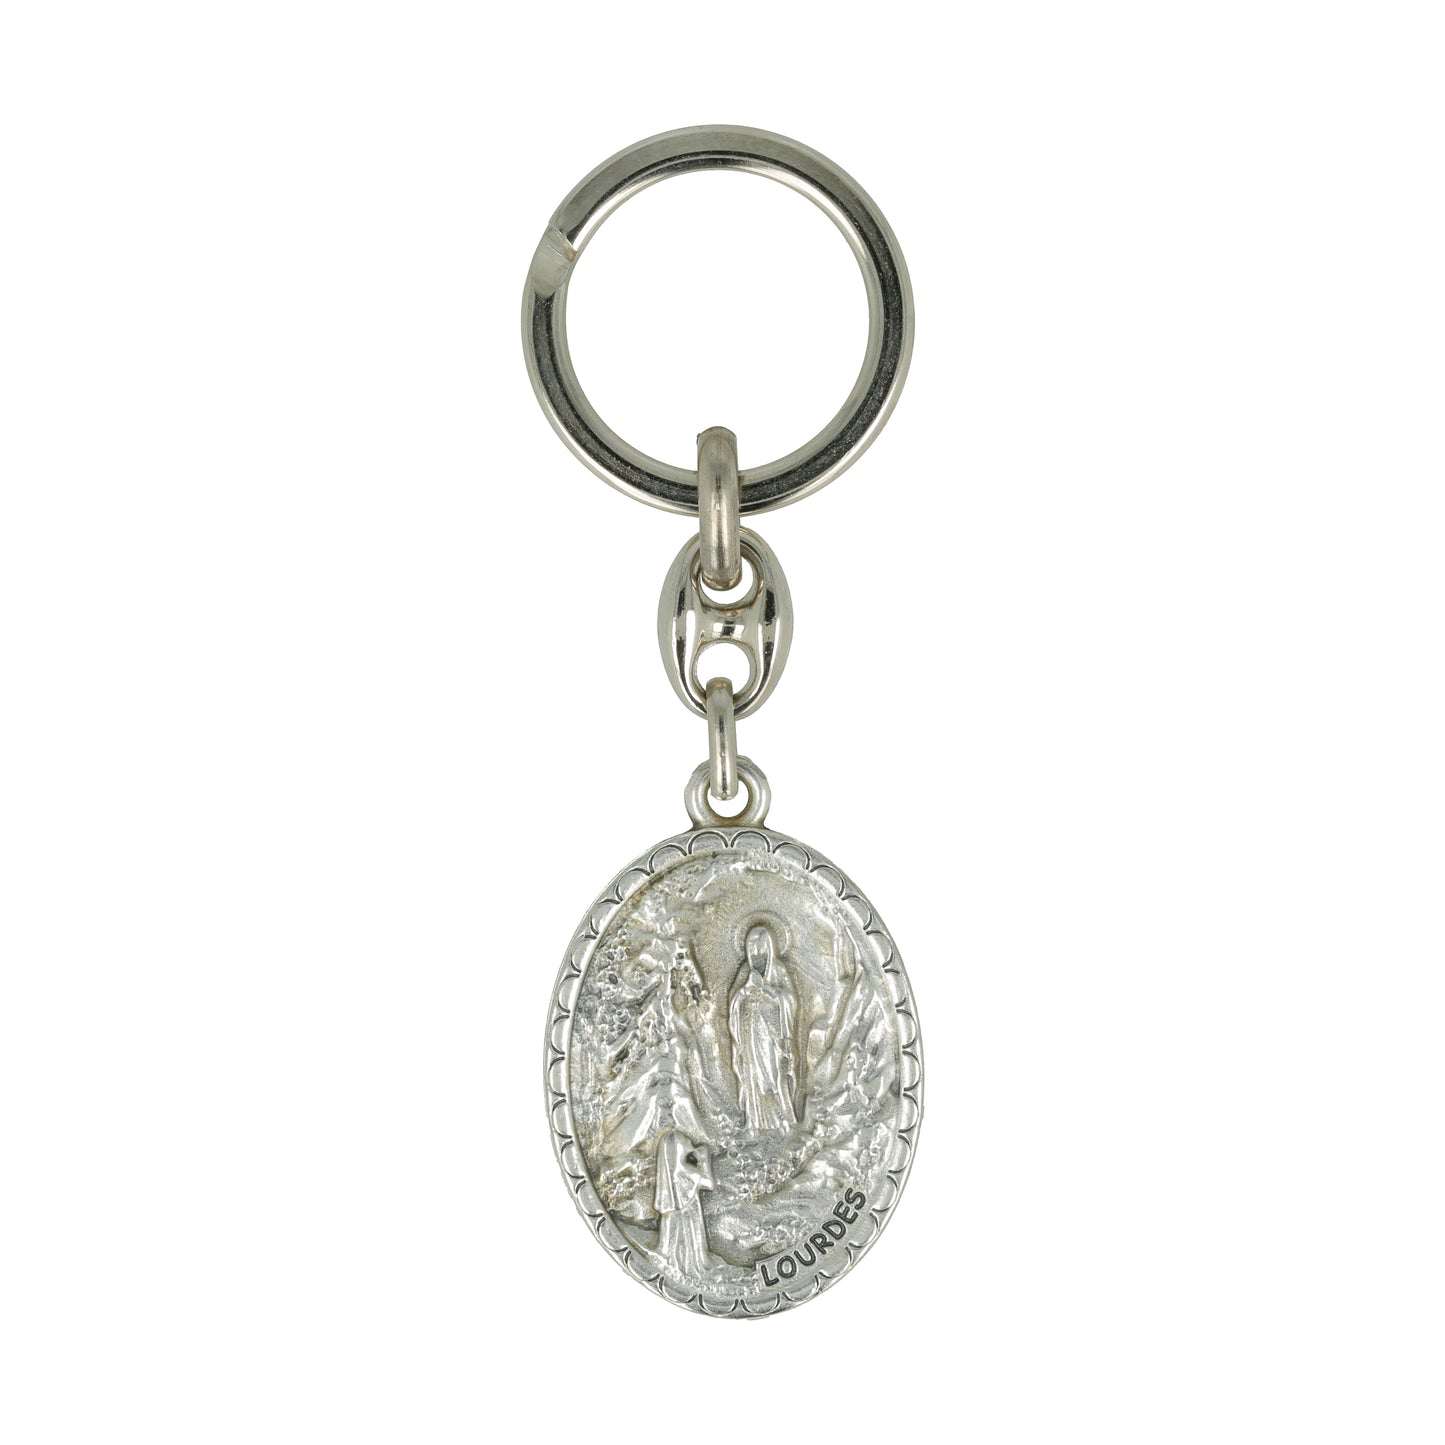 Keychain Our Lady of Lourdes San Cristobal. Souvenirs from Italy